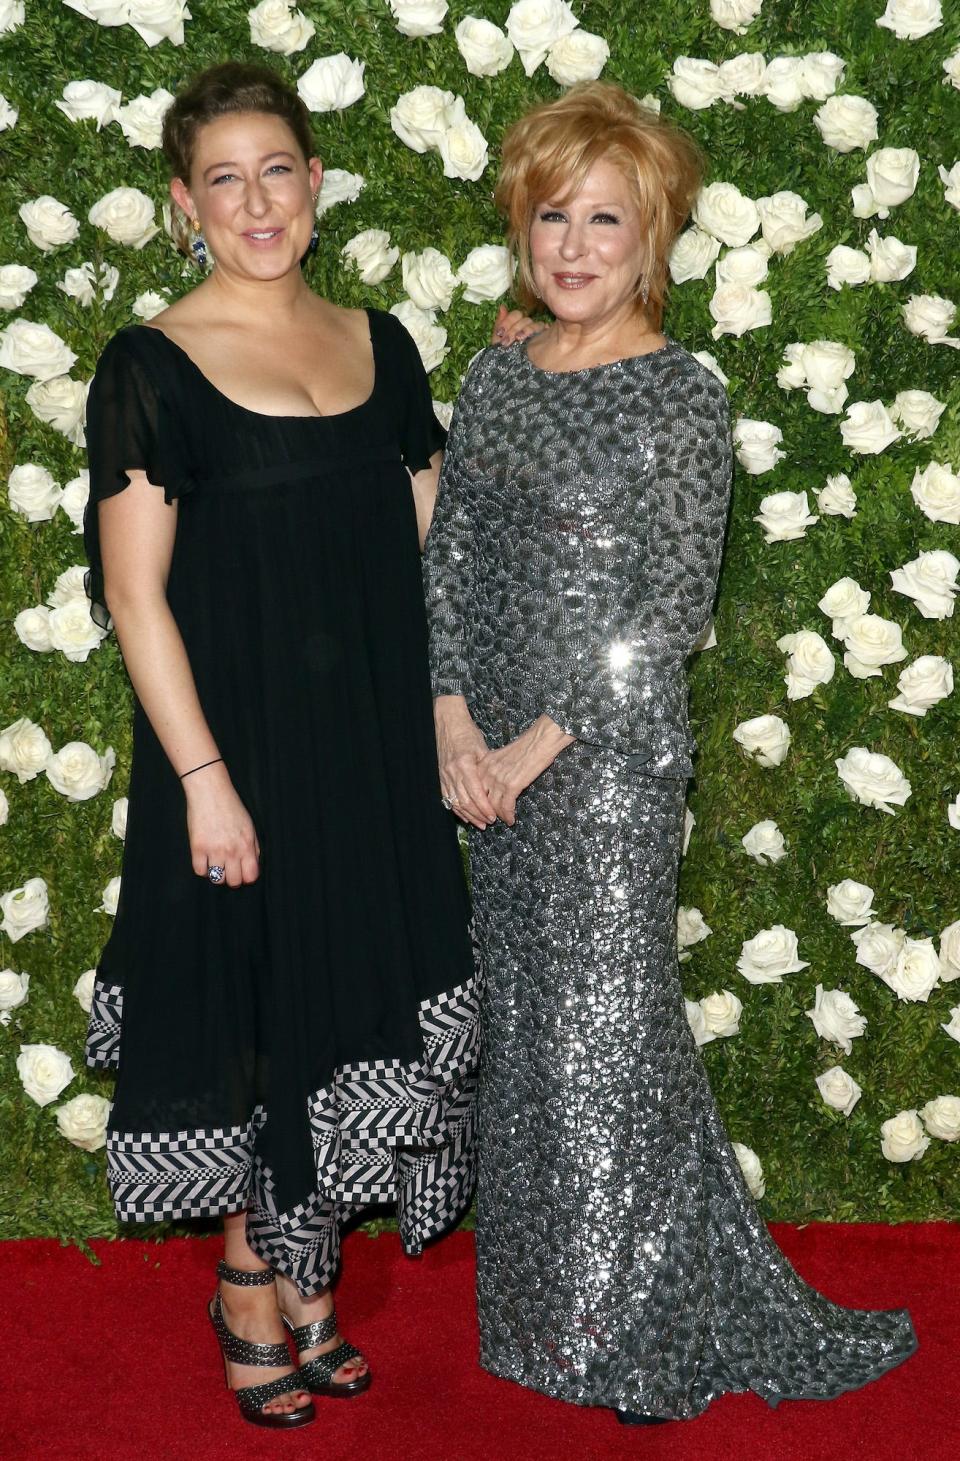 Sophie Von Haselber and Bette Midler pose together on a red carpet in June 2017.